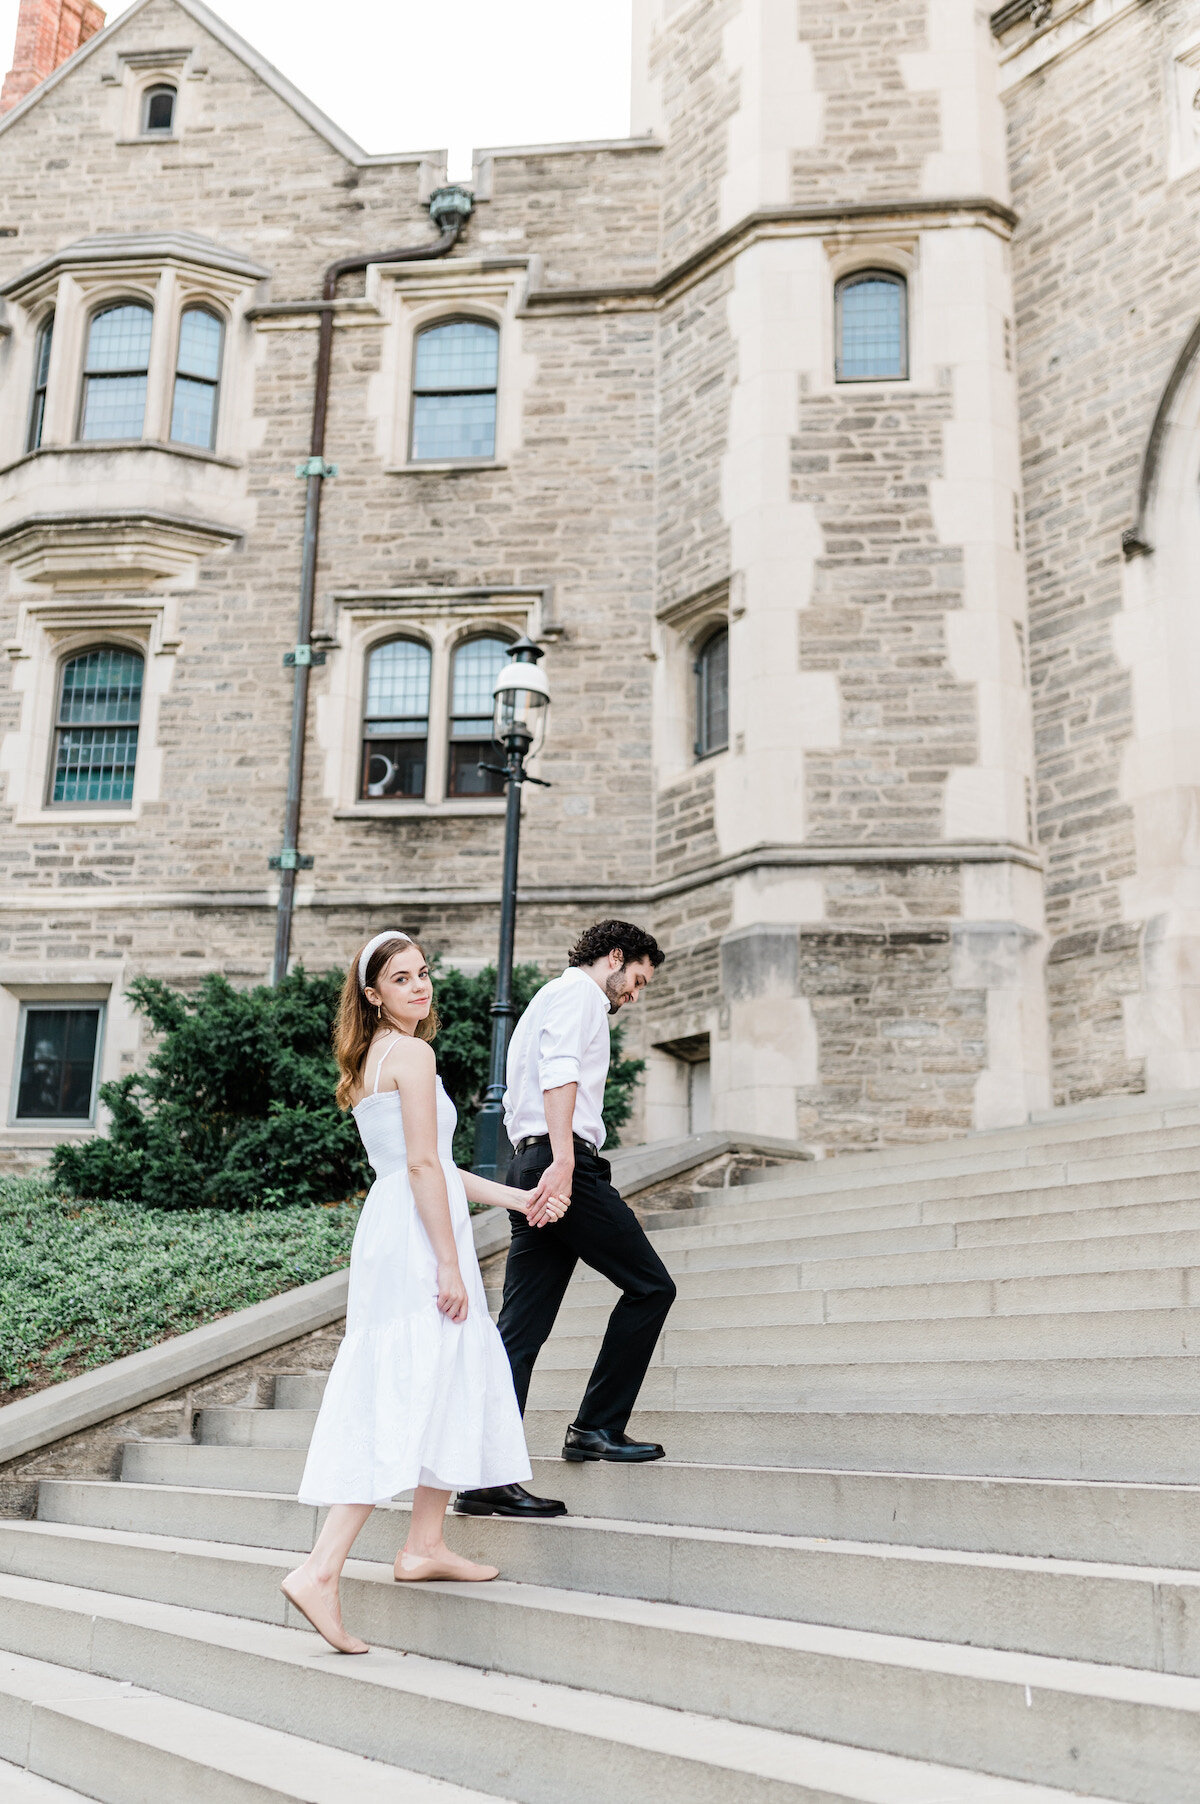 Step into the pages of your own love story with our editorial engagement sessions. In the heart of Princeton, we craft images that showcase the artful composition and genuine emotions.